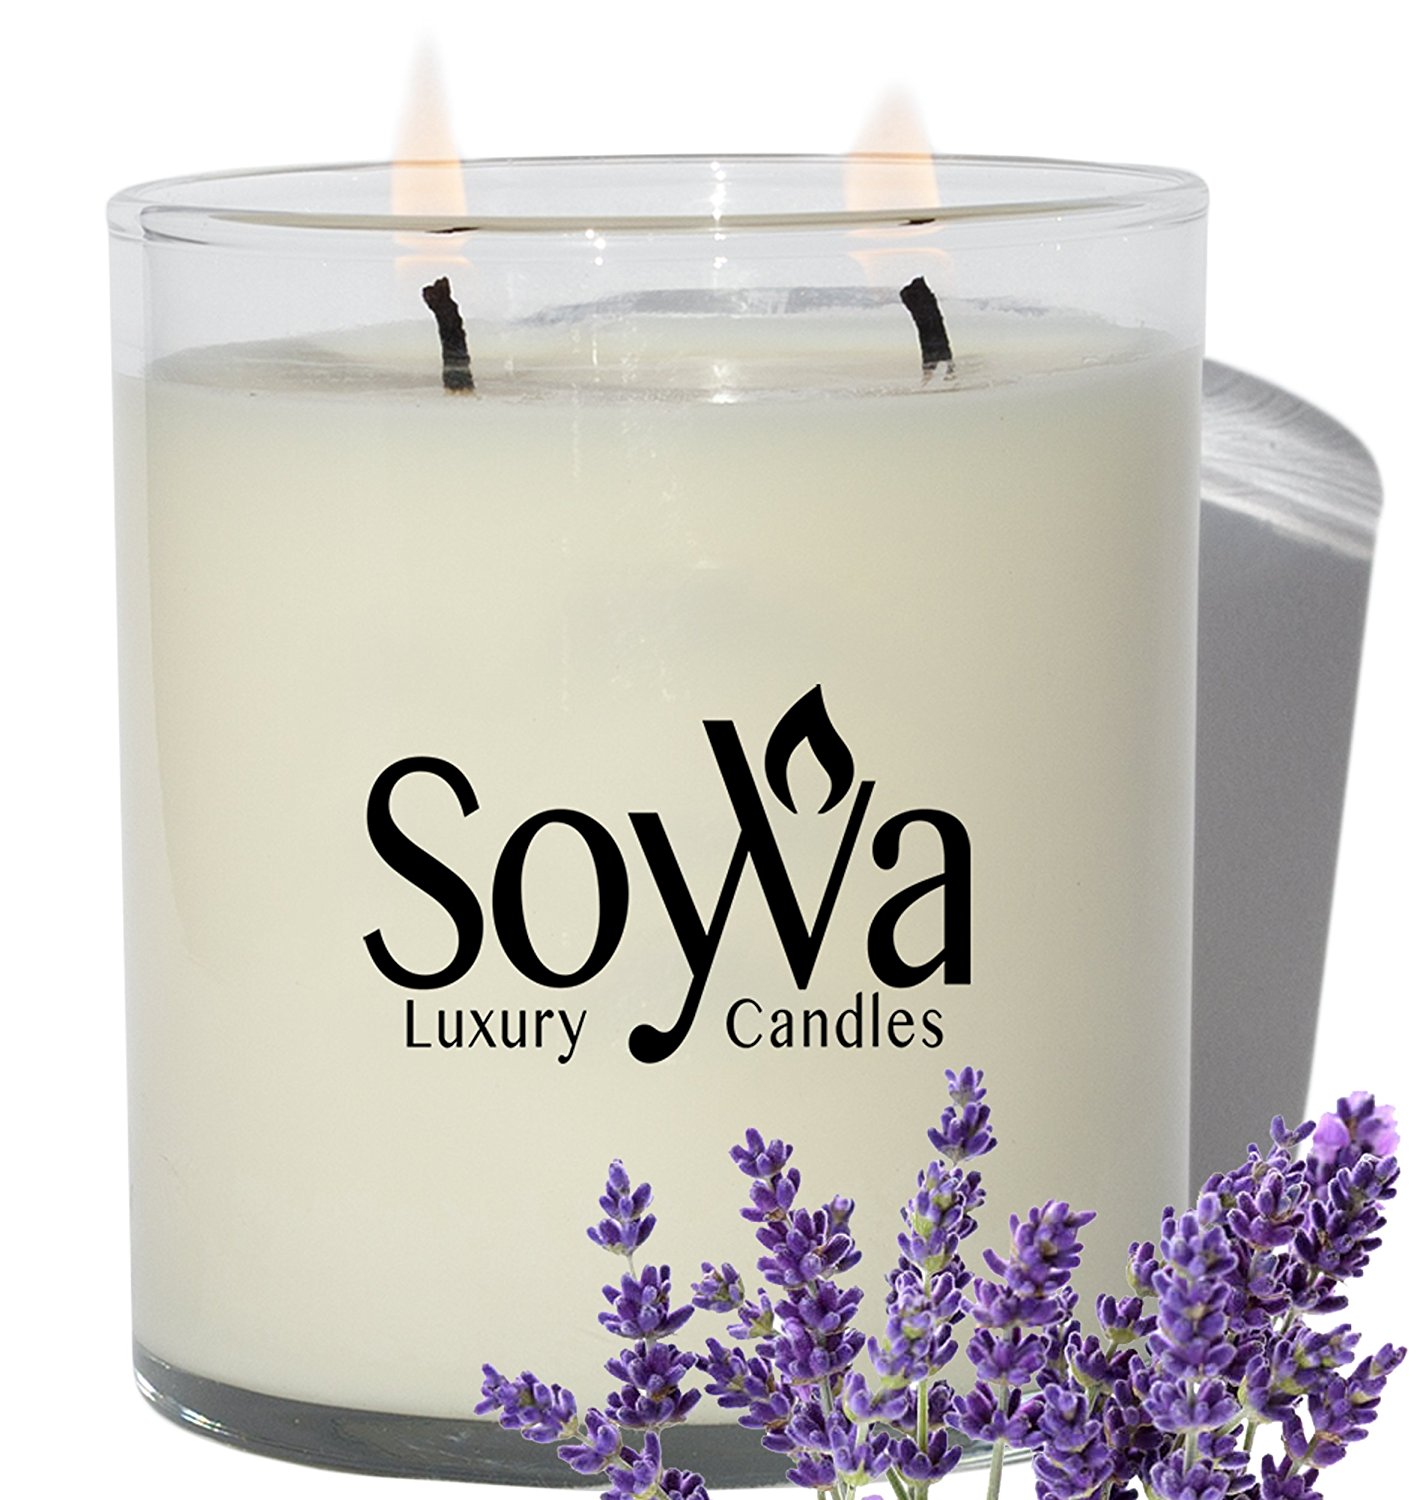 SoyVa Lavender Scented Natural Soy Wax Handmade Aromatherapy Candle, 9 oz.